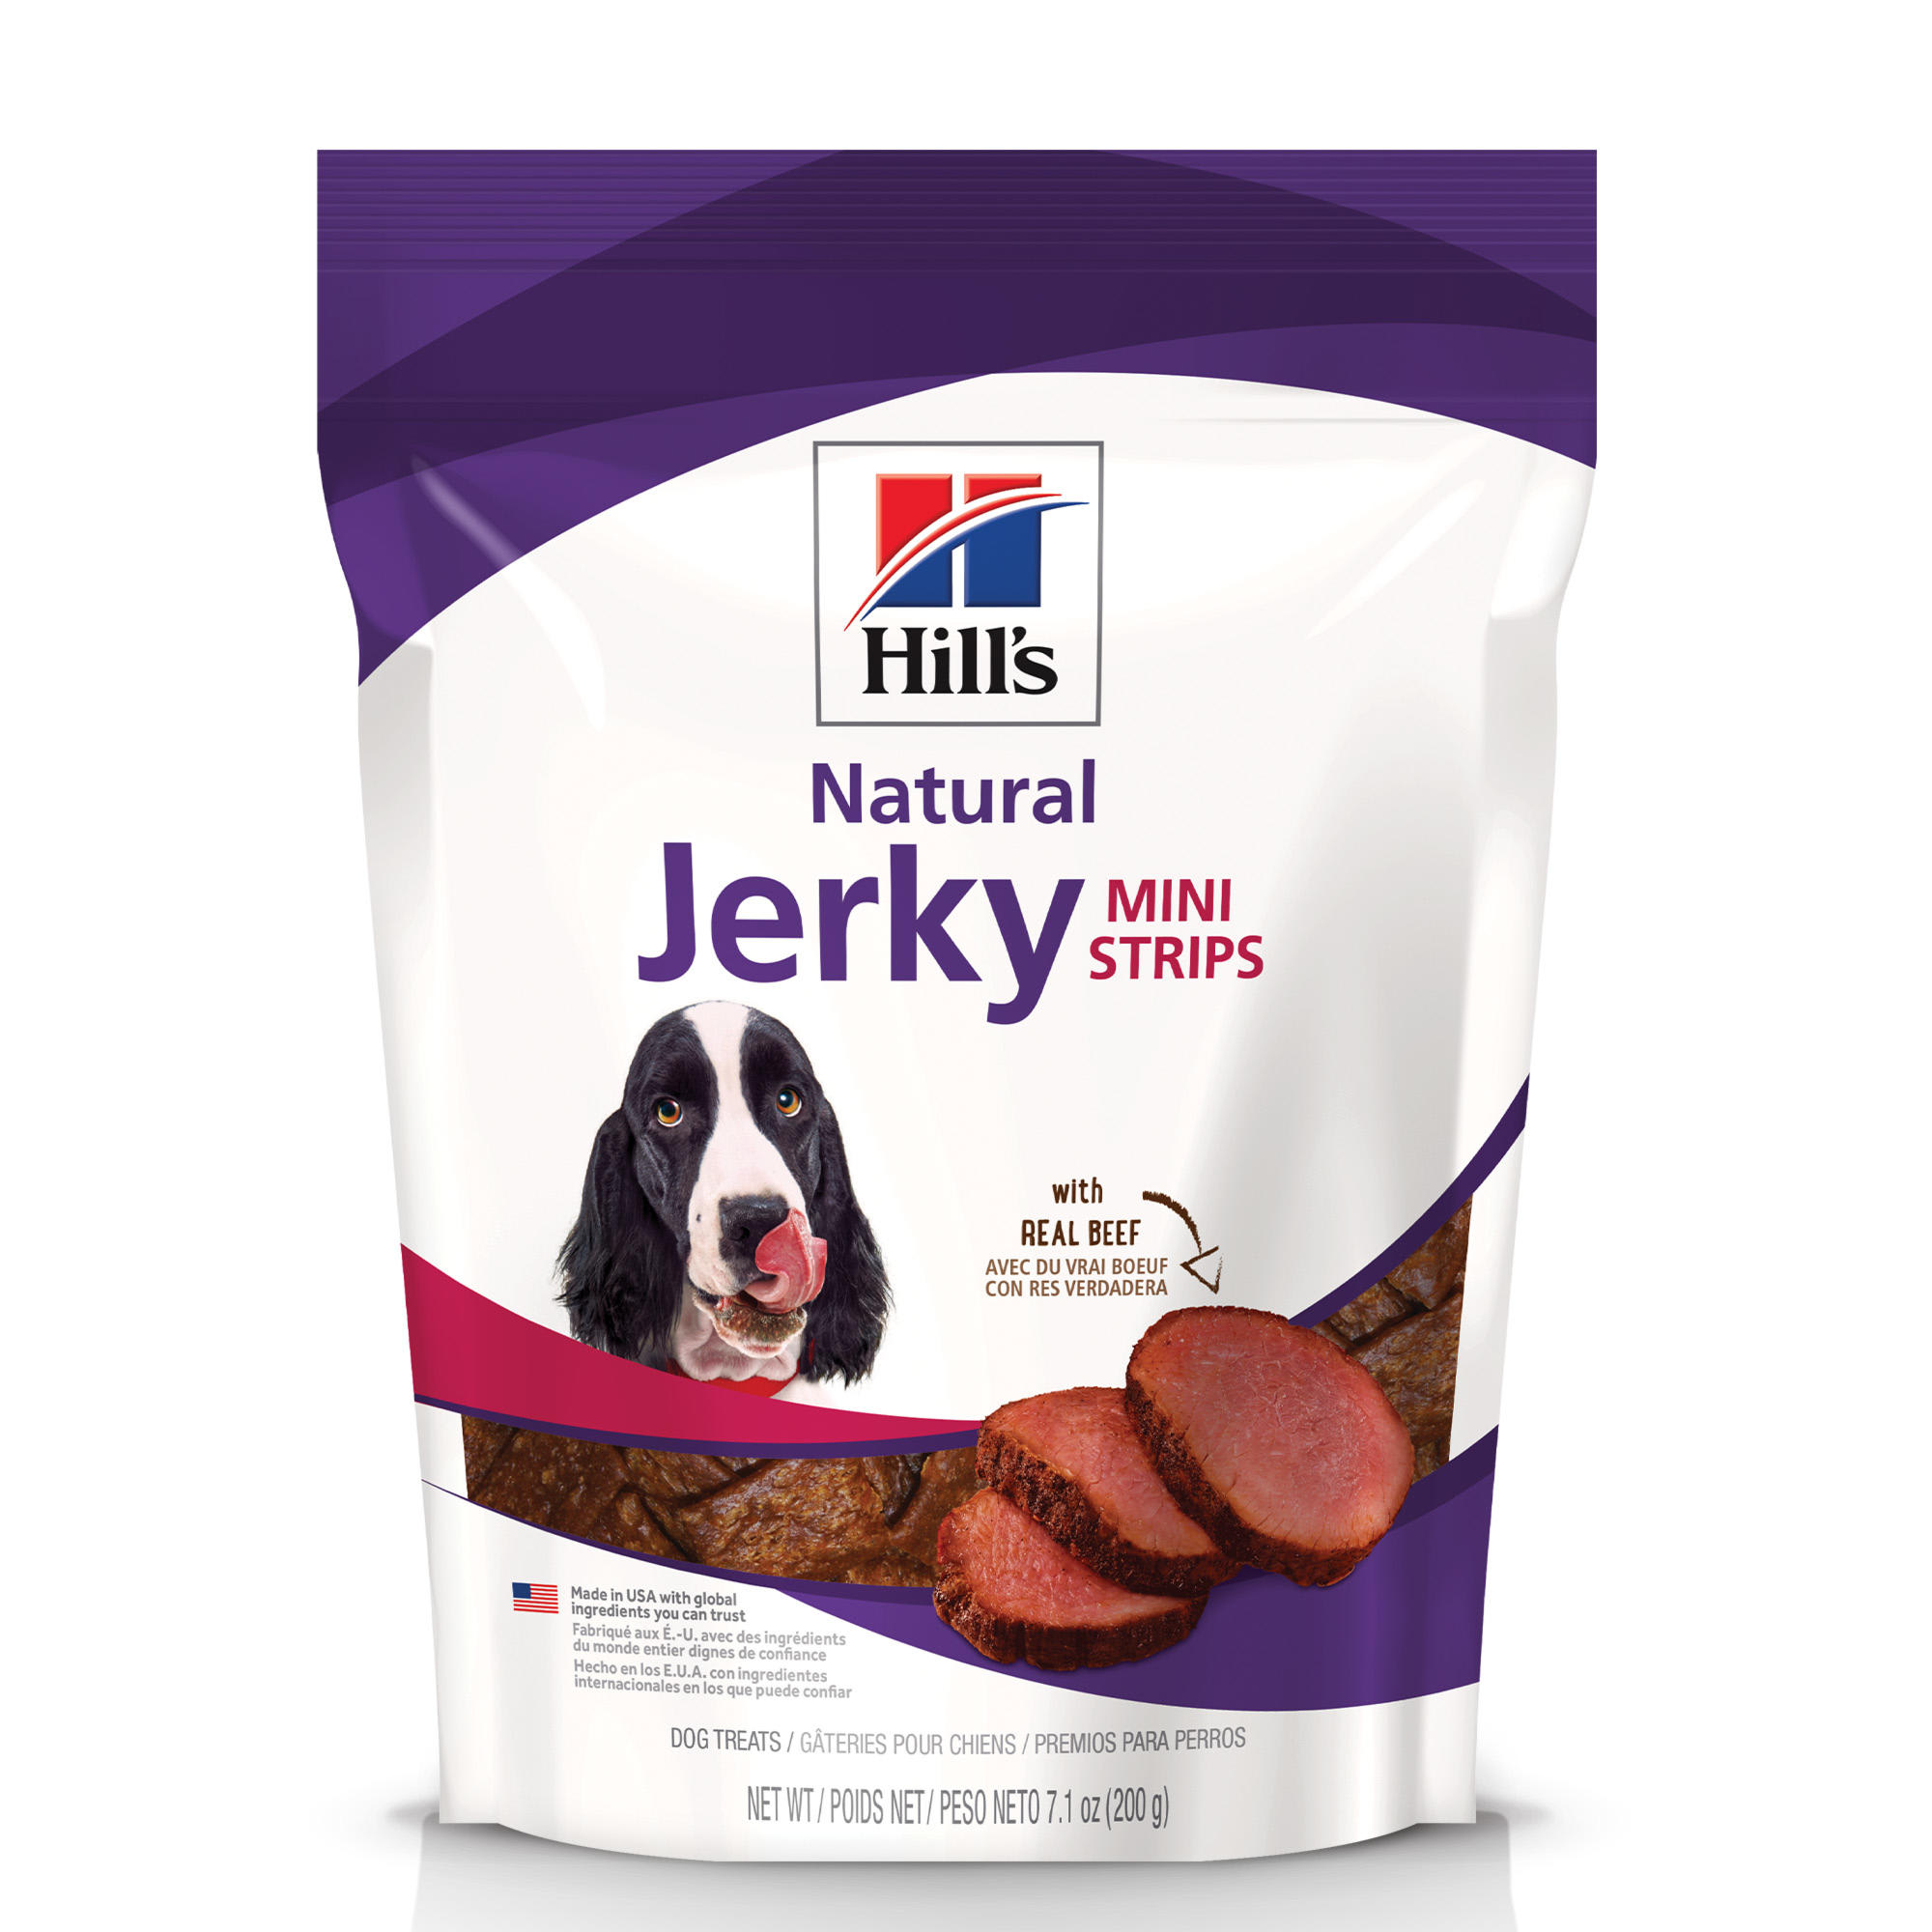 Photos - Dog Food Hills Hill's Hill's Natural Jerky Mini-Strips with Real Beef Dog Treat, 7.1 oz., 